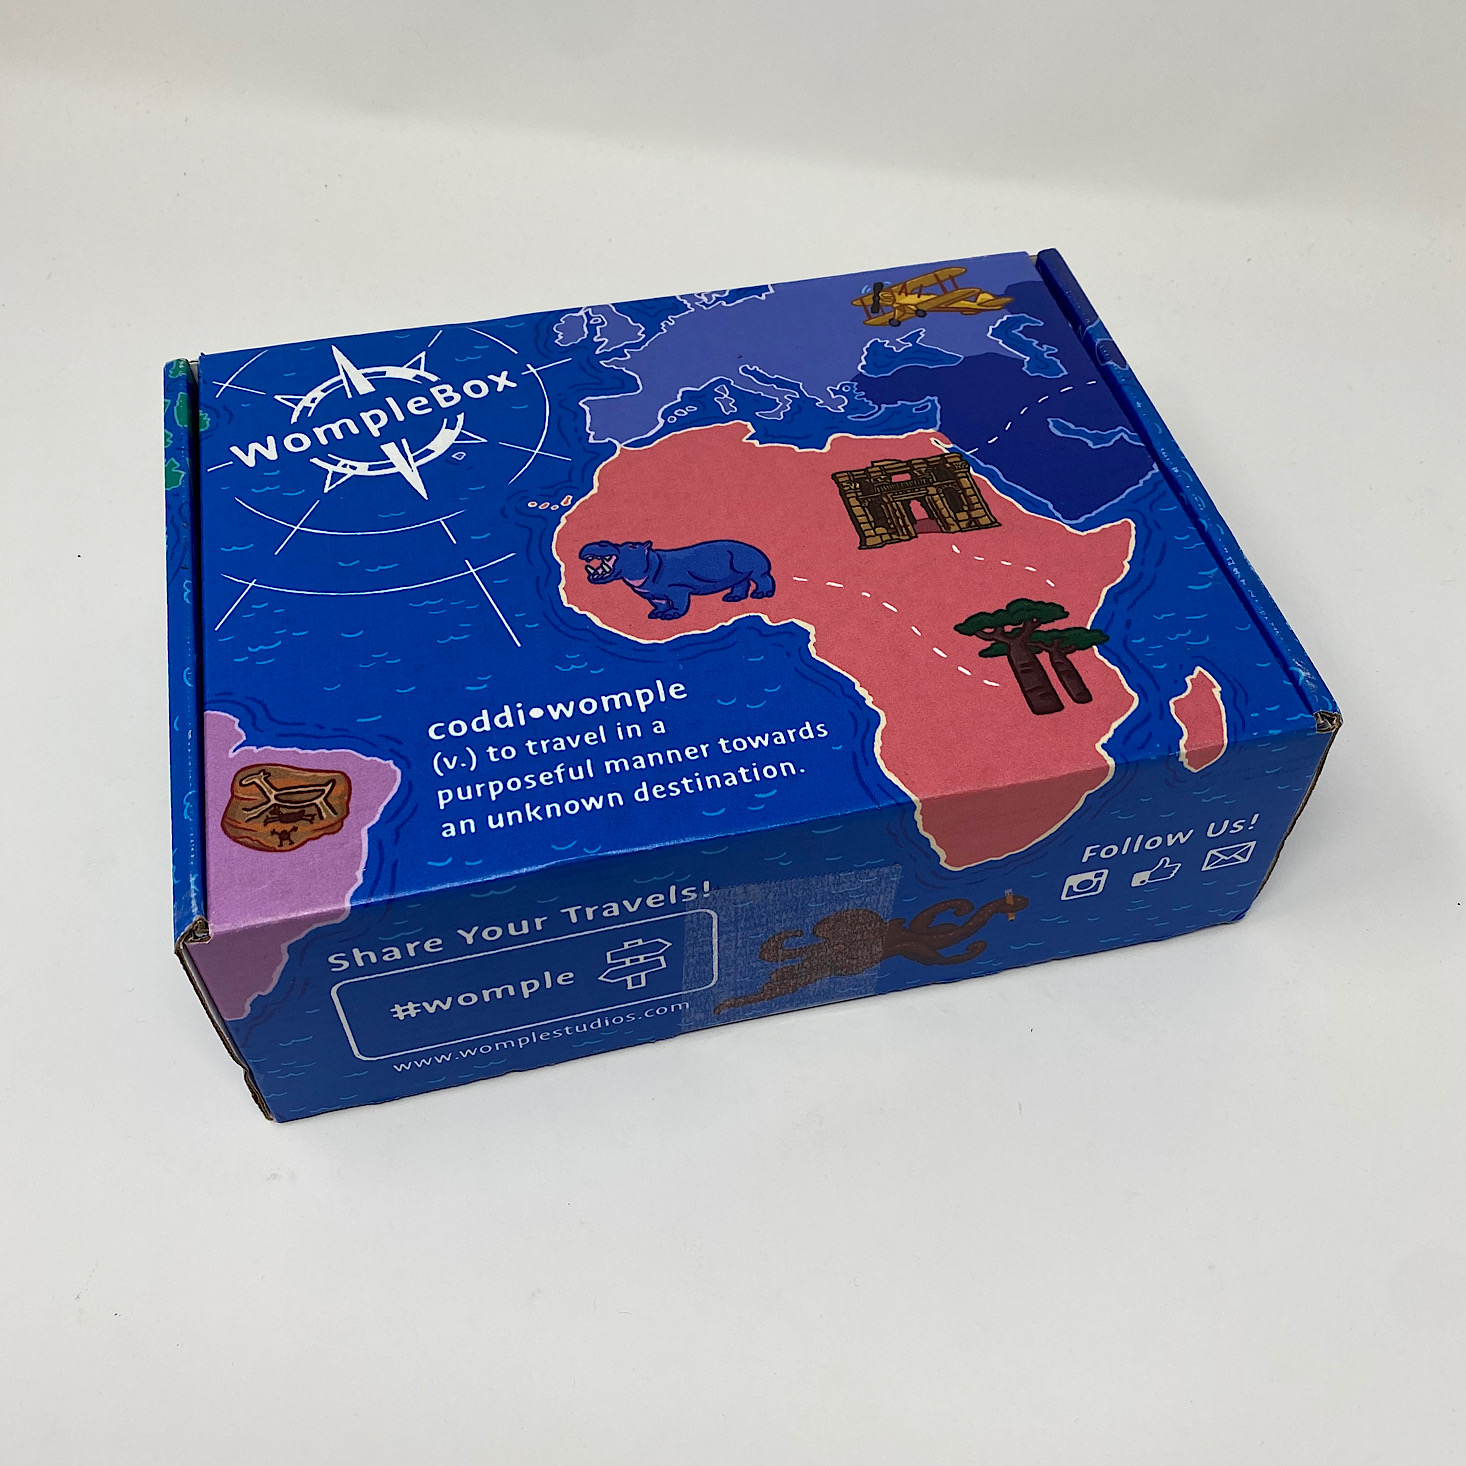 WompleBox “Ethiopia” Box Review + Coupon – June 2020